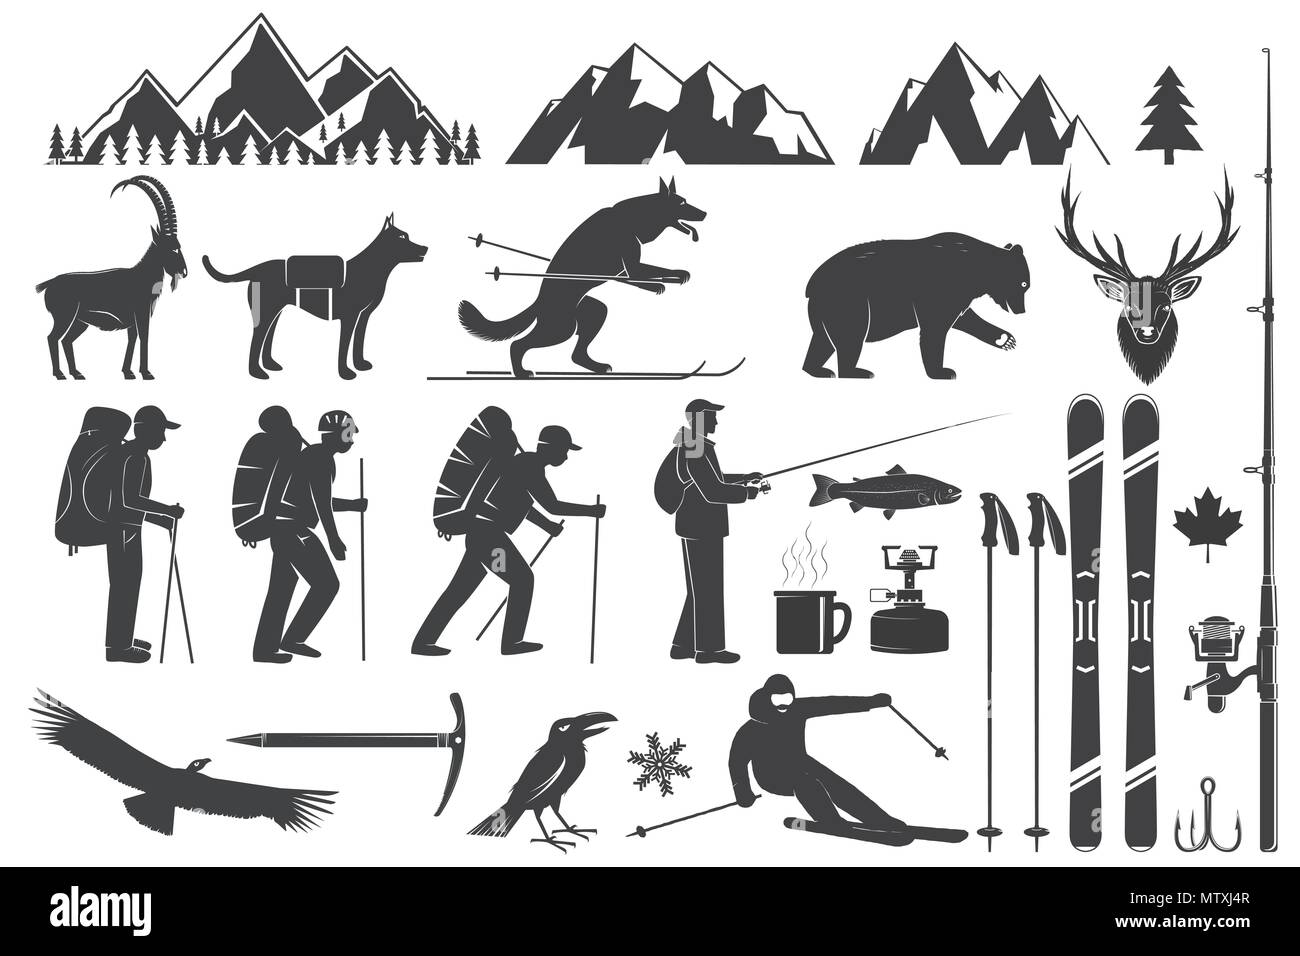 Mountaineering, hiking, climbing, fishing, skiing and other adventure icons. Vector illustration. Vintage typography design with ice axe, rock climbin Stock Vector